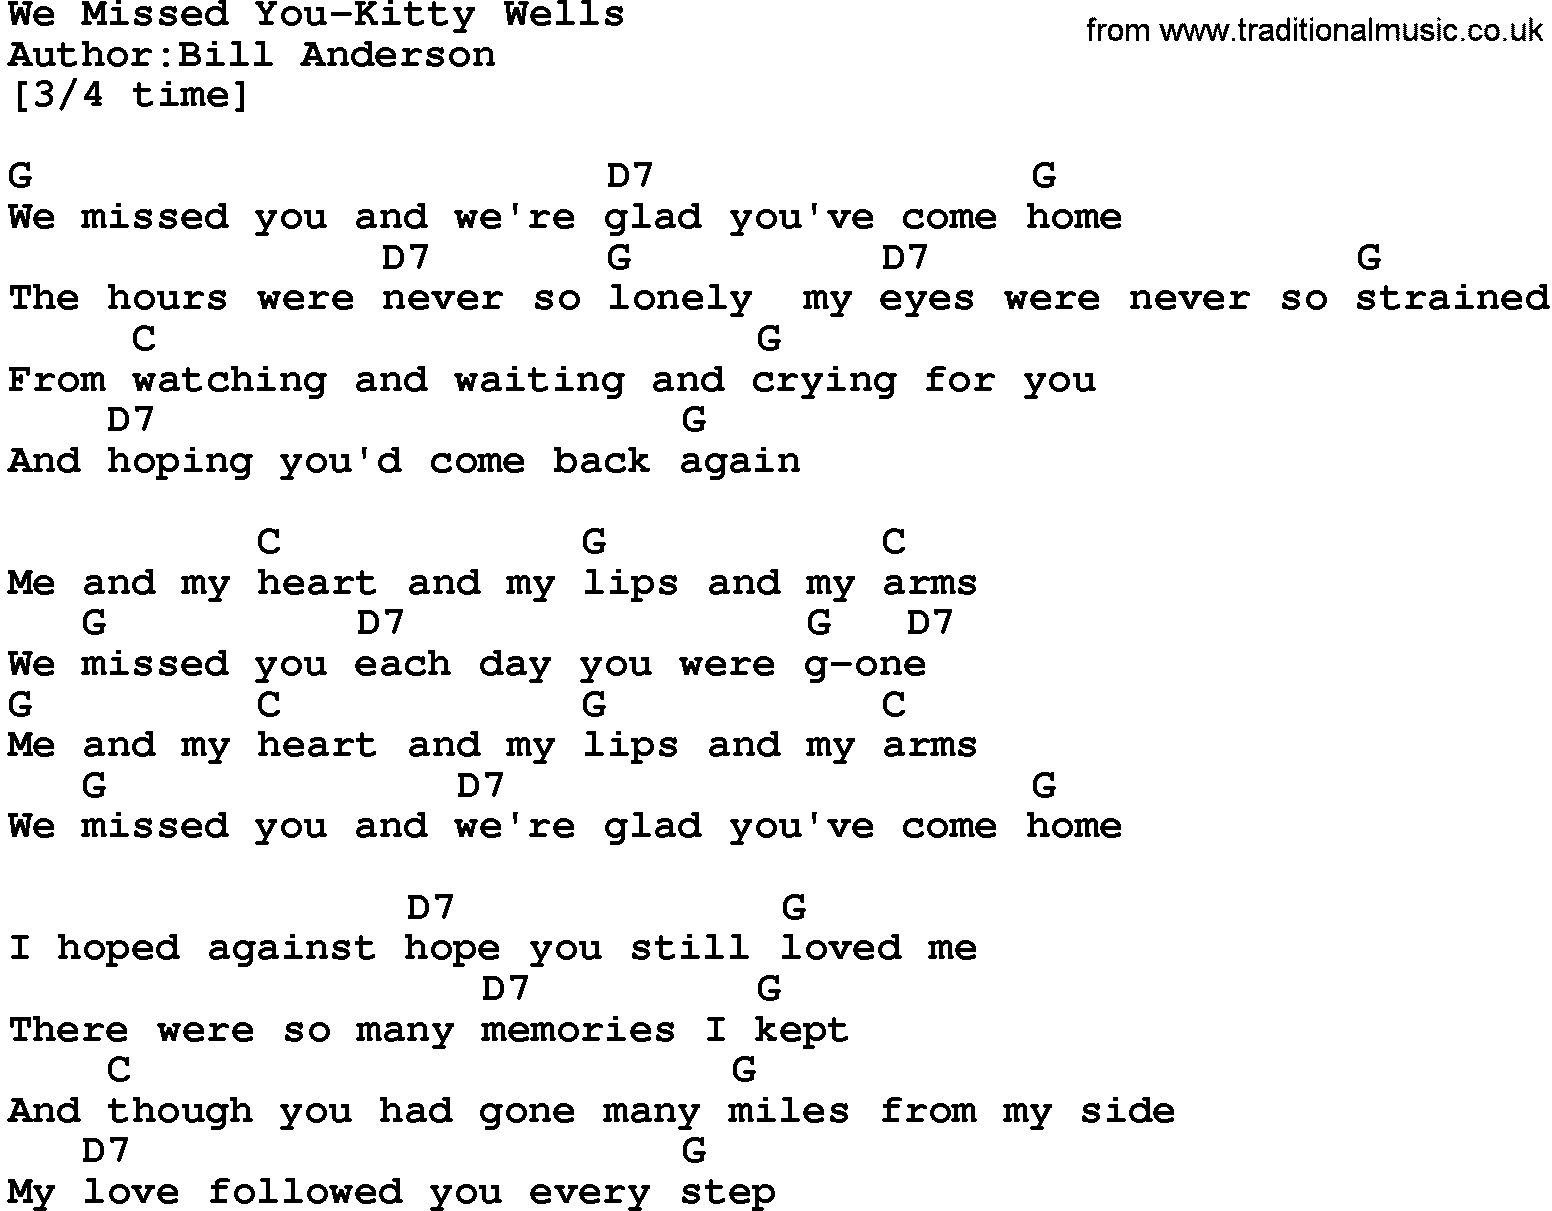 Country music song: We Missed You-Kitty Wells lyrics and chords